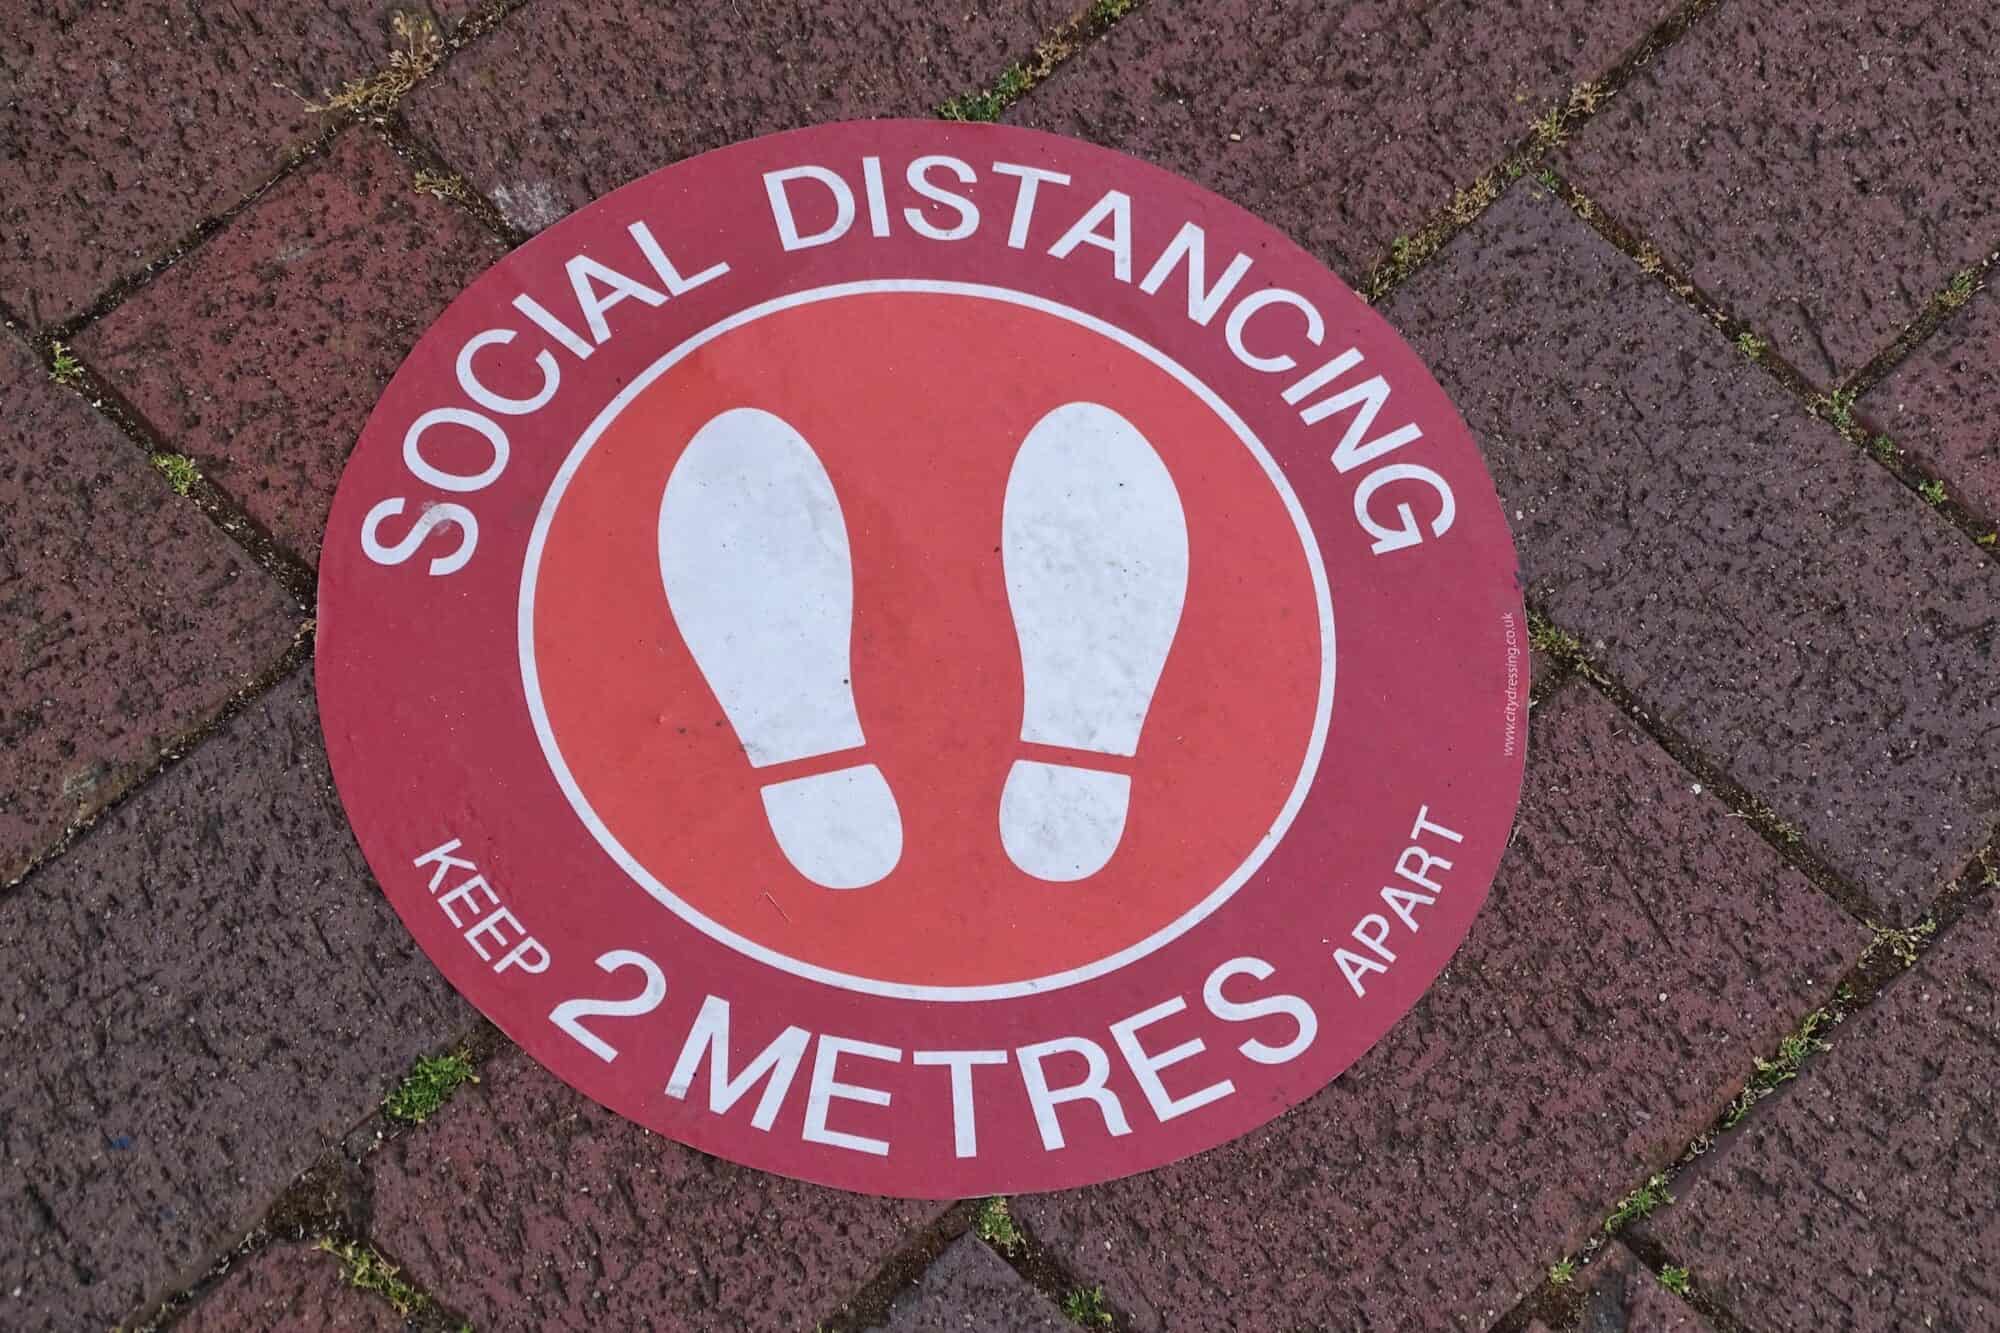 A temporary on the sign placed on a paved floor reads "Social Distancing: keep 2 metres apart".